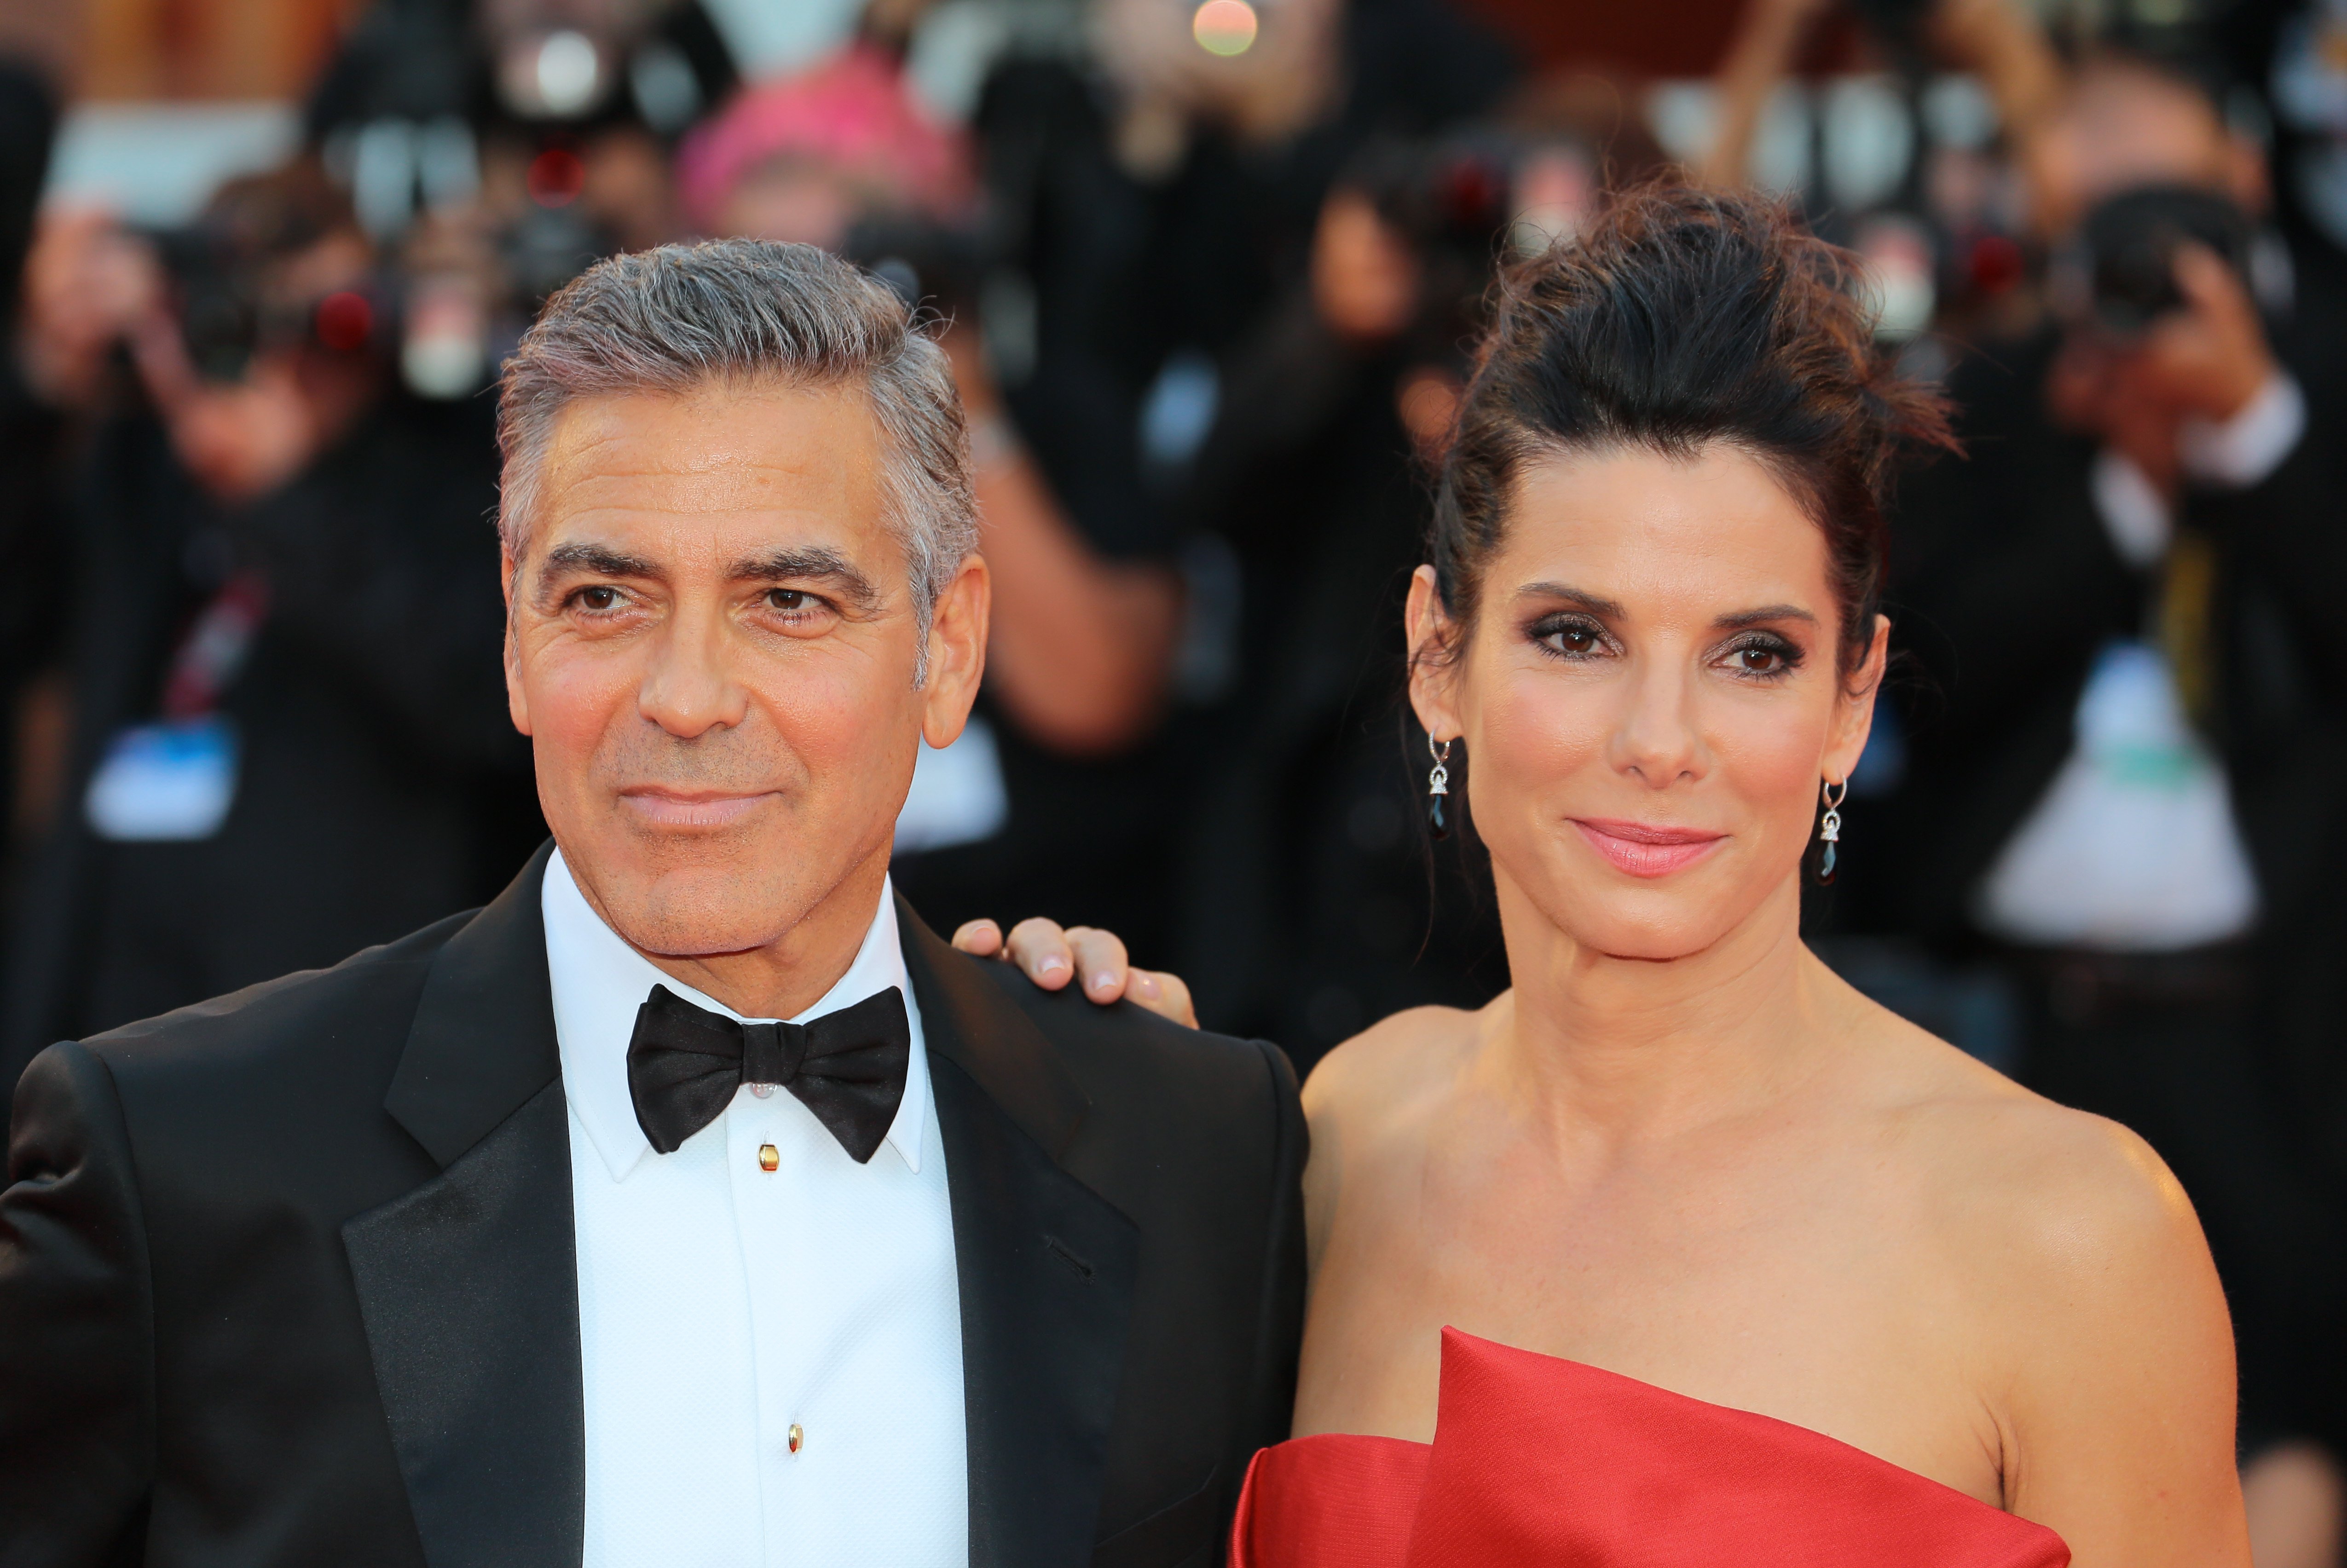 George Clooney, and co-star, Sandra Bullock at the "Gravity" premiere in Venice, August, 2012. | Photo: Shutterstock. 